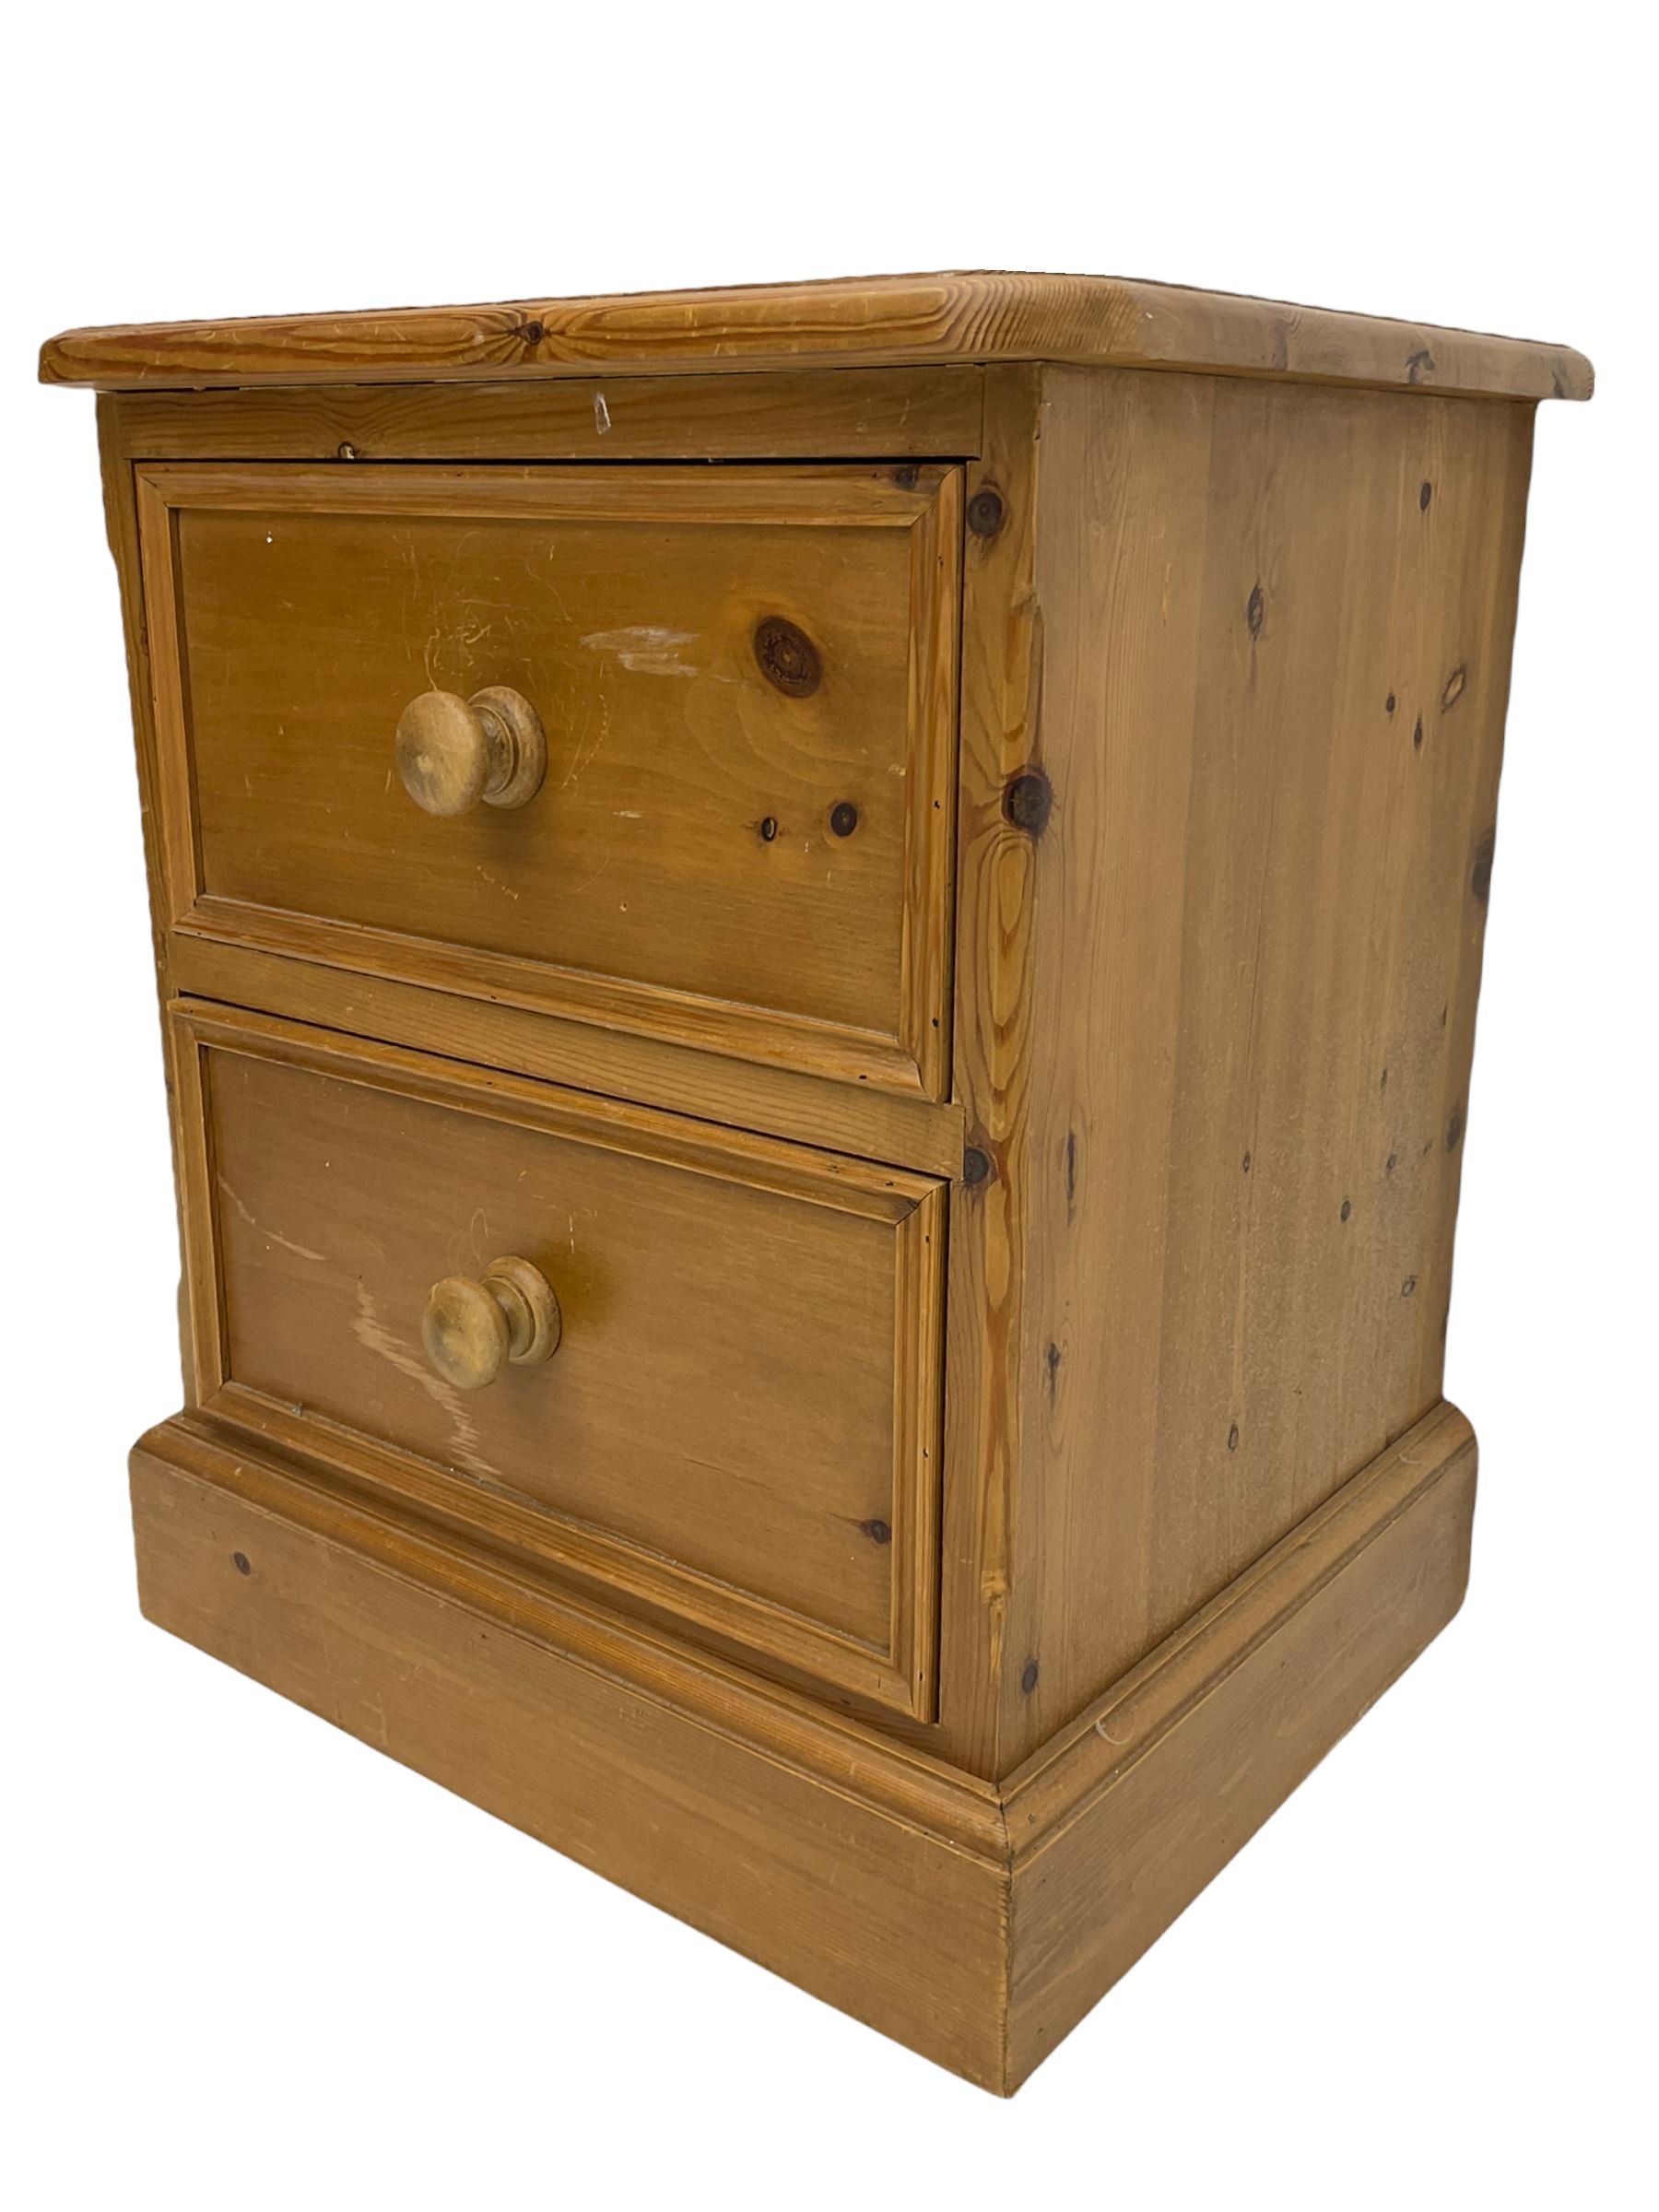 Waxed pine two drawer pedestal chest - Image 4 of 5